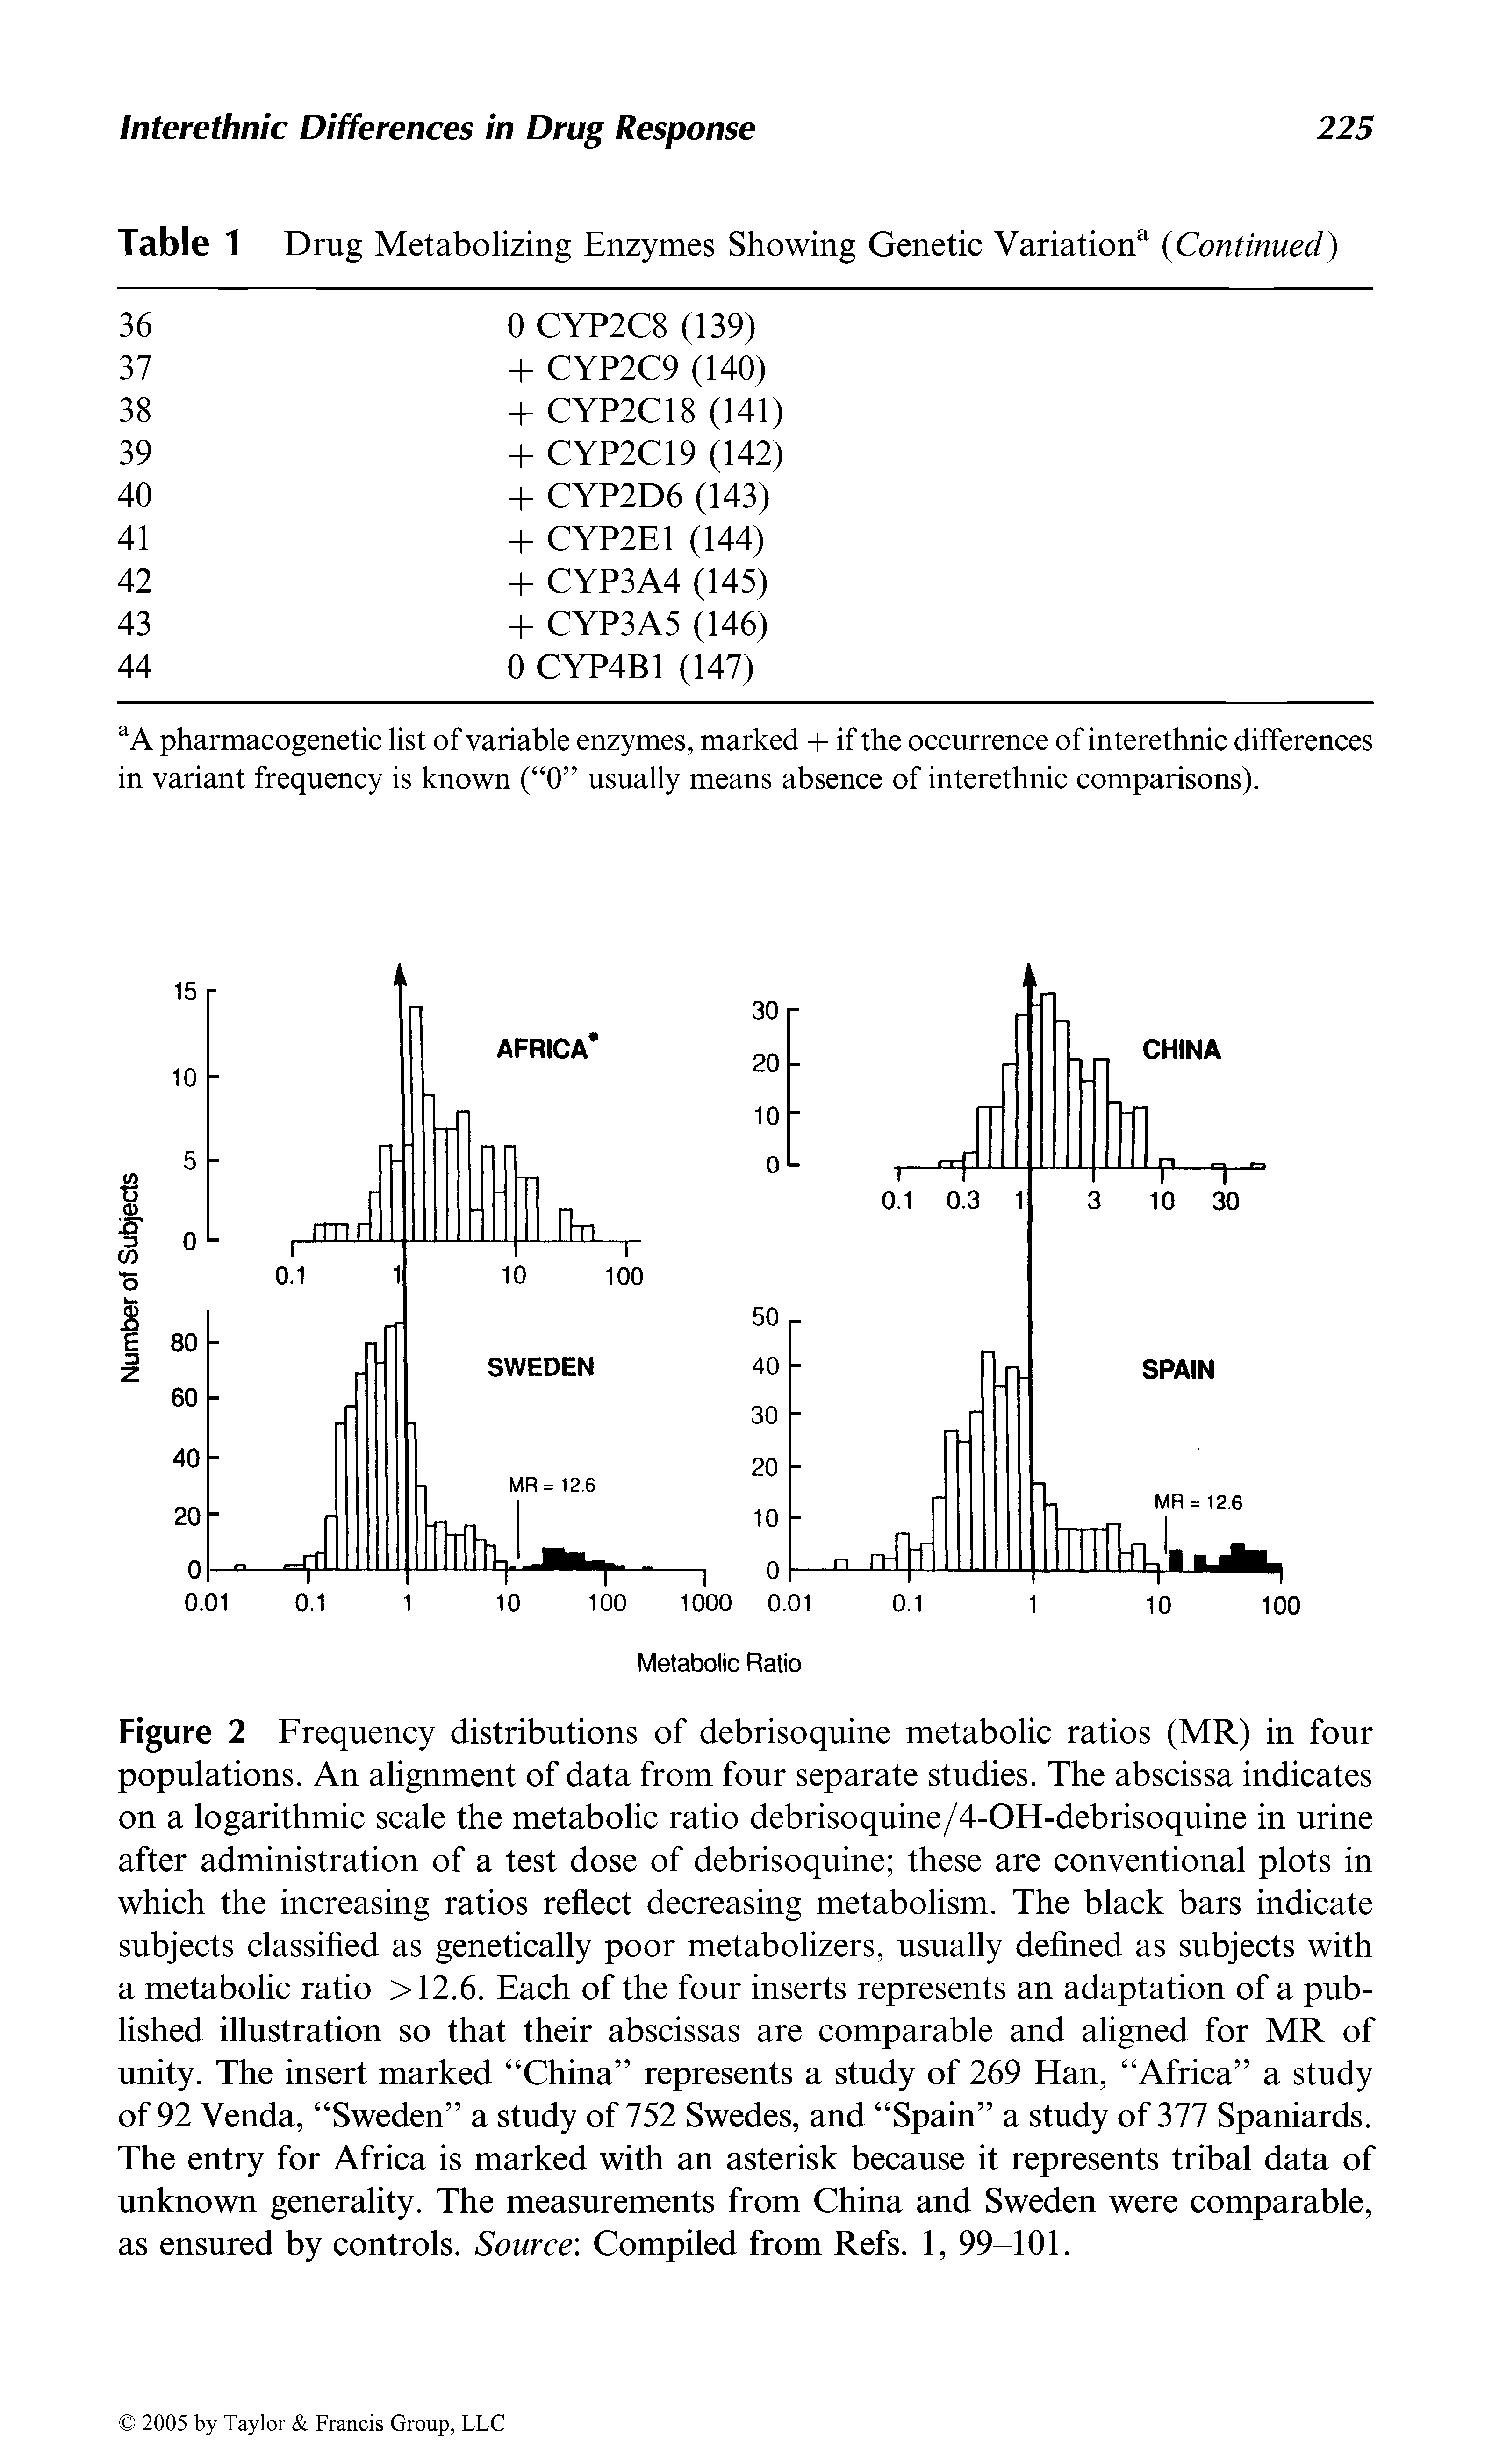 Figure 2 Frequency distributions of debrisoquine metabolic ratios (MR) in four populations. An alignment of data from four separate studies. The abscissa indicates on a logarithmic scale the metabolic ratio debrisoquine/4-OH-debrisoquine in urine after administration of a test dose of debrisoquine these are conventional plots in which the increasing ratios reflect decreasing metabolism. The black bars indicate subjects classified as genetically poor metabolizers, usually defined as subjects with a metabolic ratio >12.6. Each of the four inserts represents an adaptation of a published illustration so that their abscissas are comparable and aligned for MR of unity. The insert marked China represents a study of 269 Han, Africa a study of 92 Venda, Sweden a study of 752 Swedes, and Spain a study of 377 Spaniards. The entry for Africa is marked with an asterisk because it represents tribal data of unknown generality. The measurements from China and Sweden were comparable, as ensured by controls. Source Compiled from Refs. 1, 99-101.